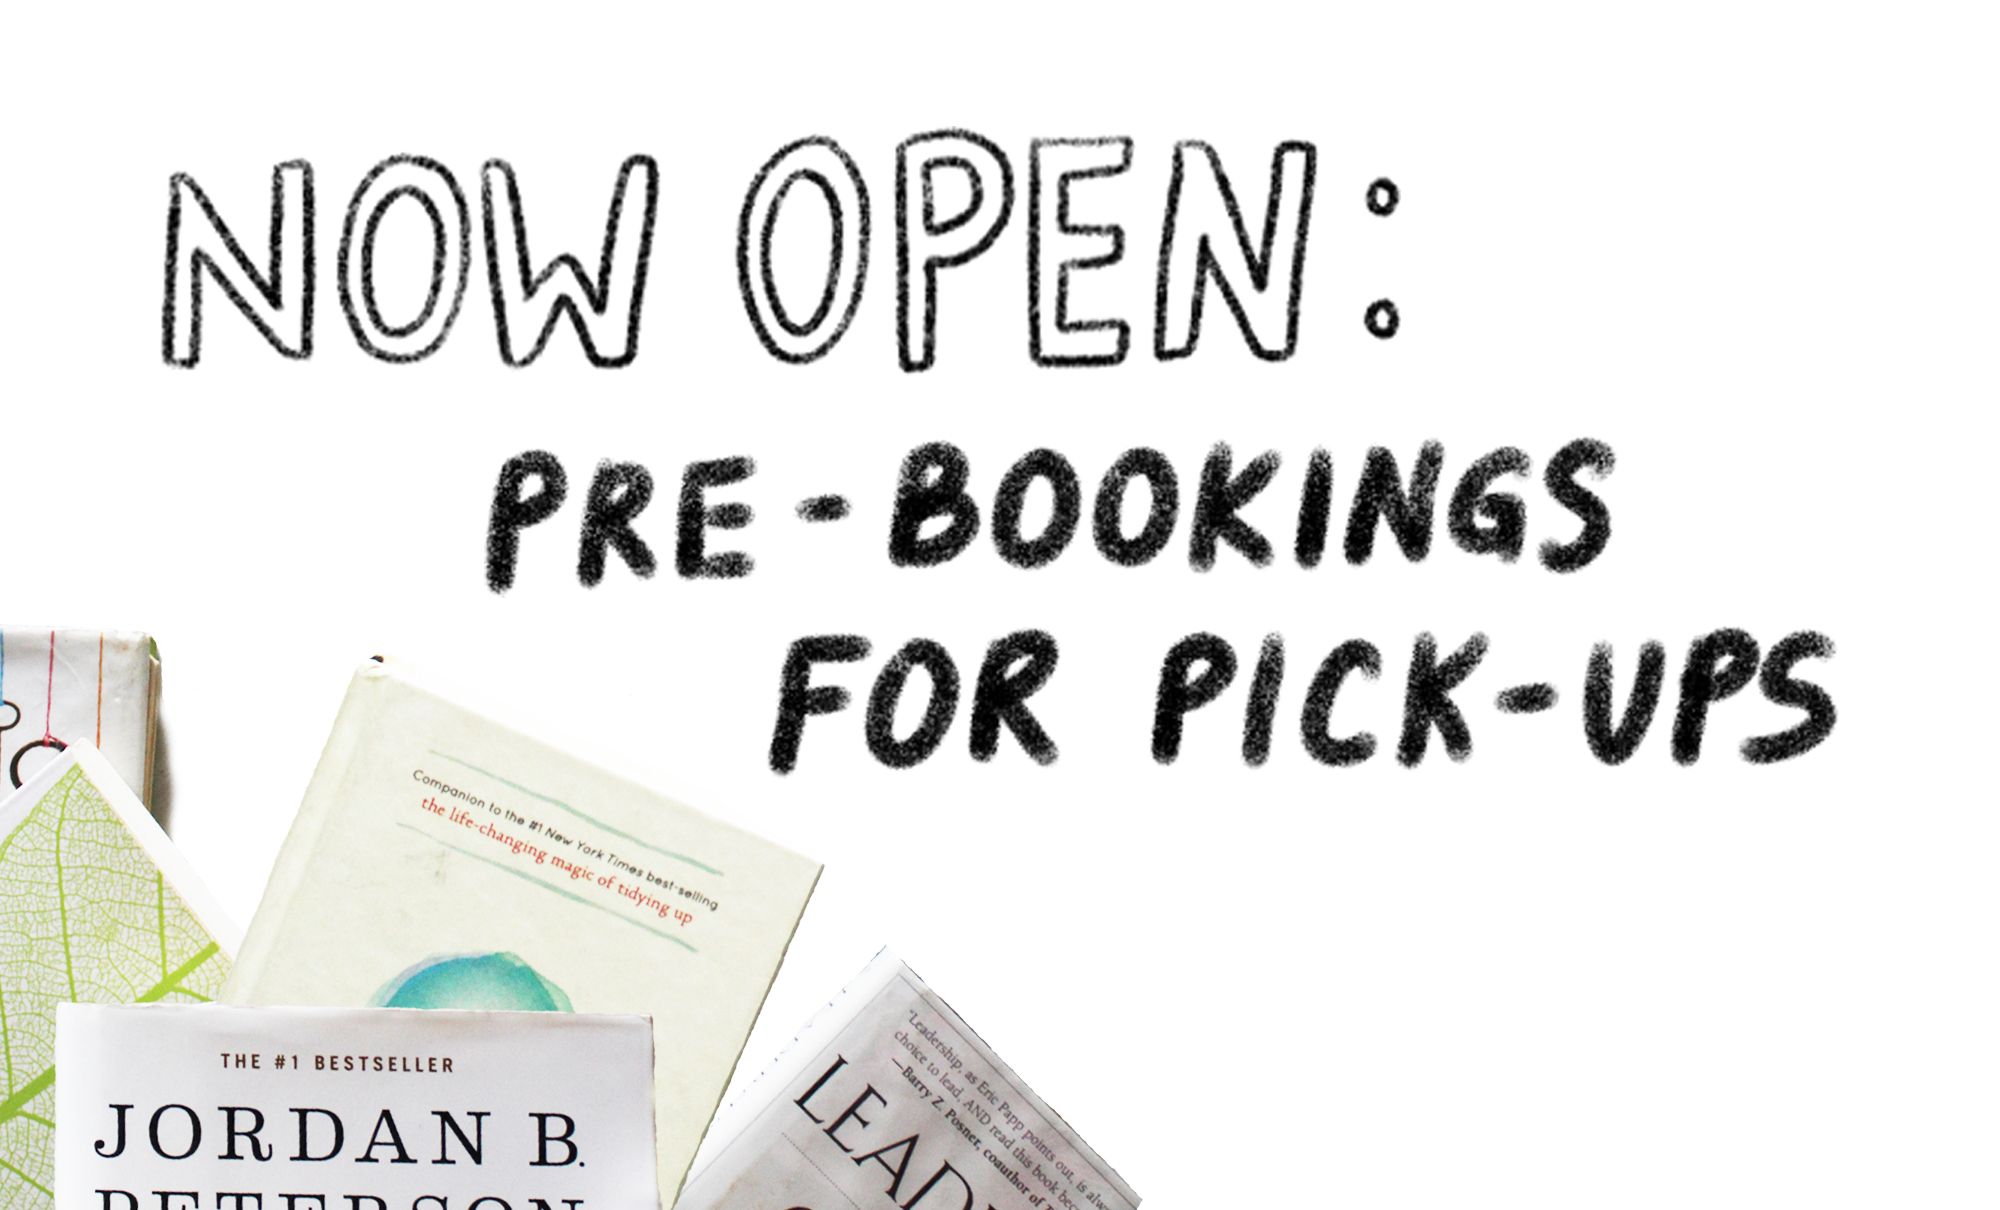 Pre-bookings for pick-ups are now open!